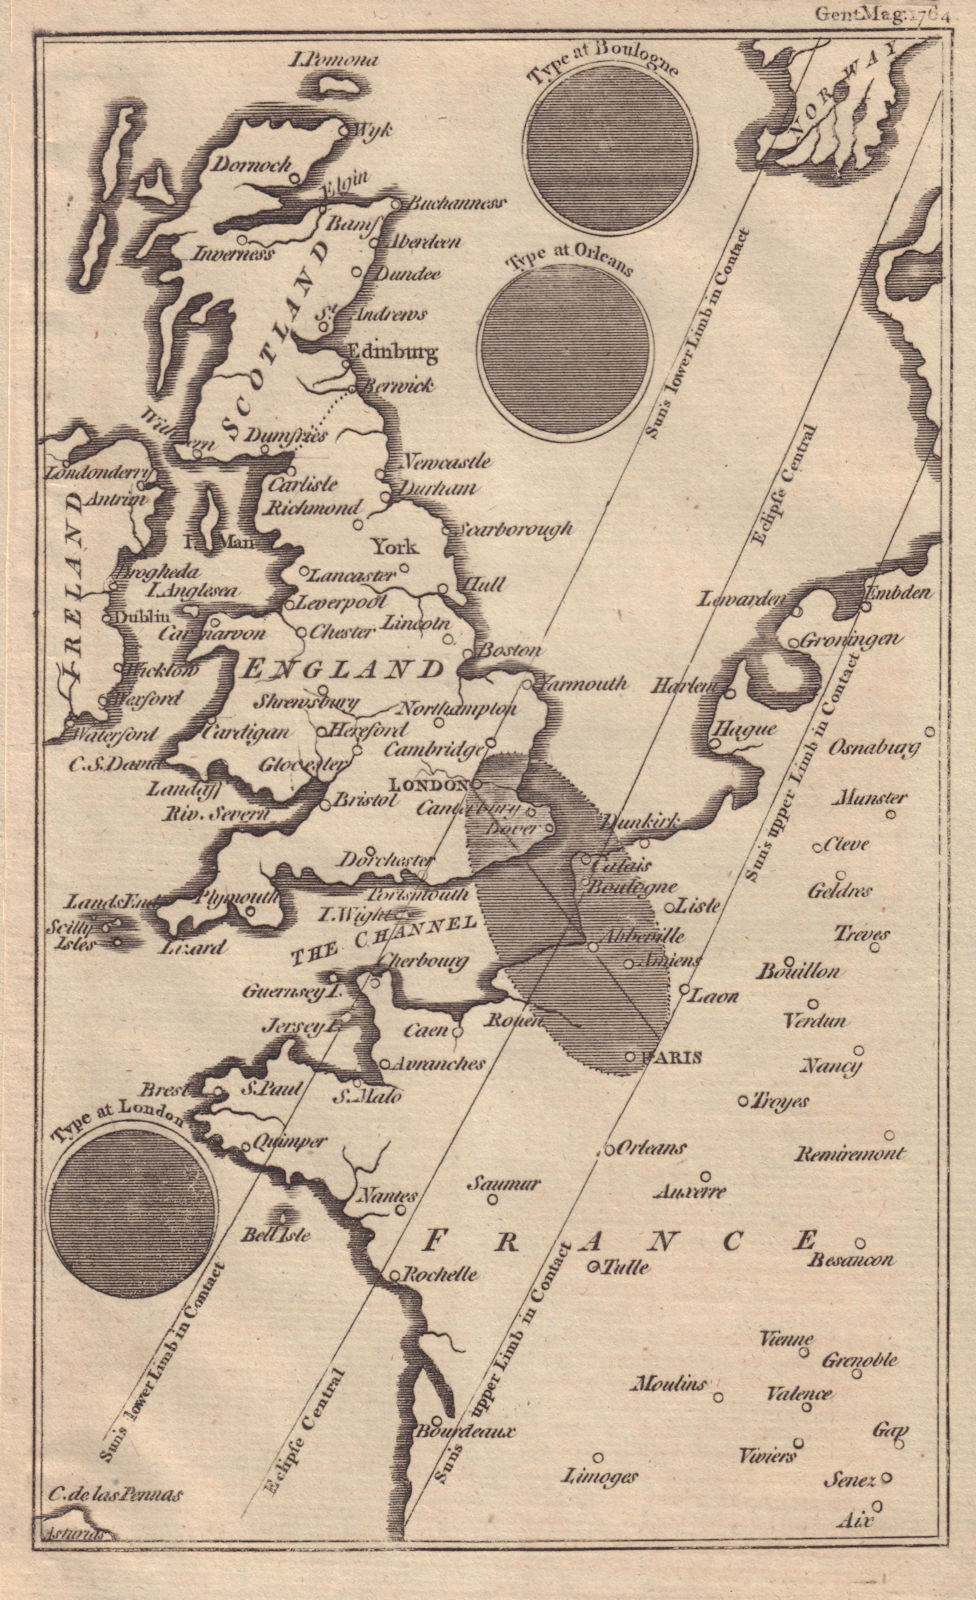 Associate Product The Solar eclipse of 1 April 1764 across England & France. GENTS MAG 1764 map